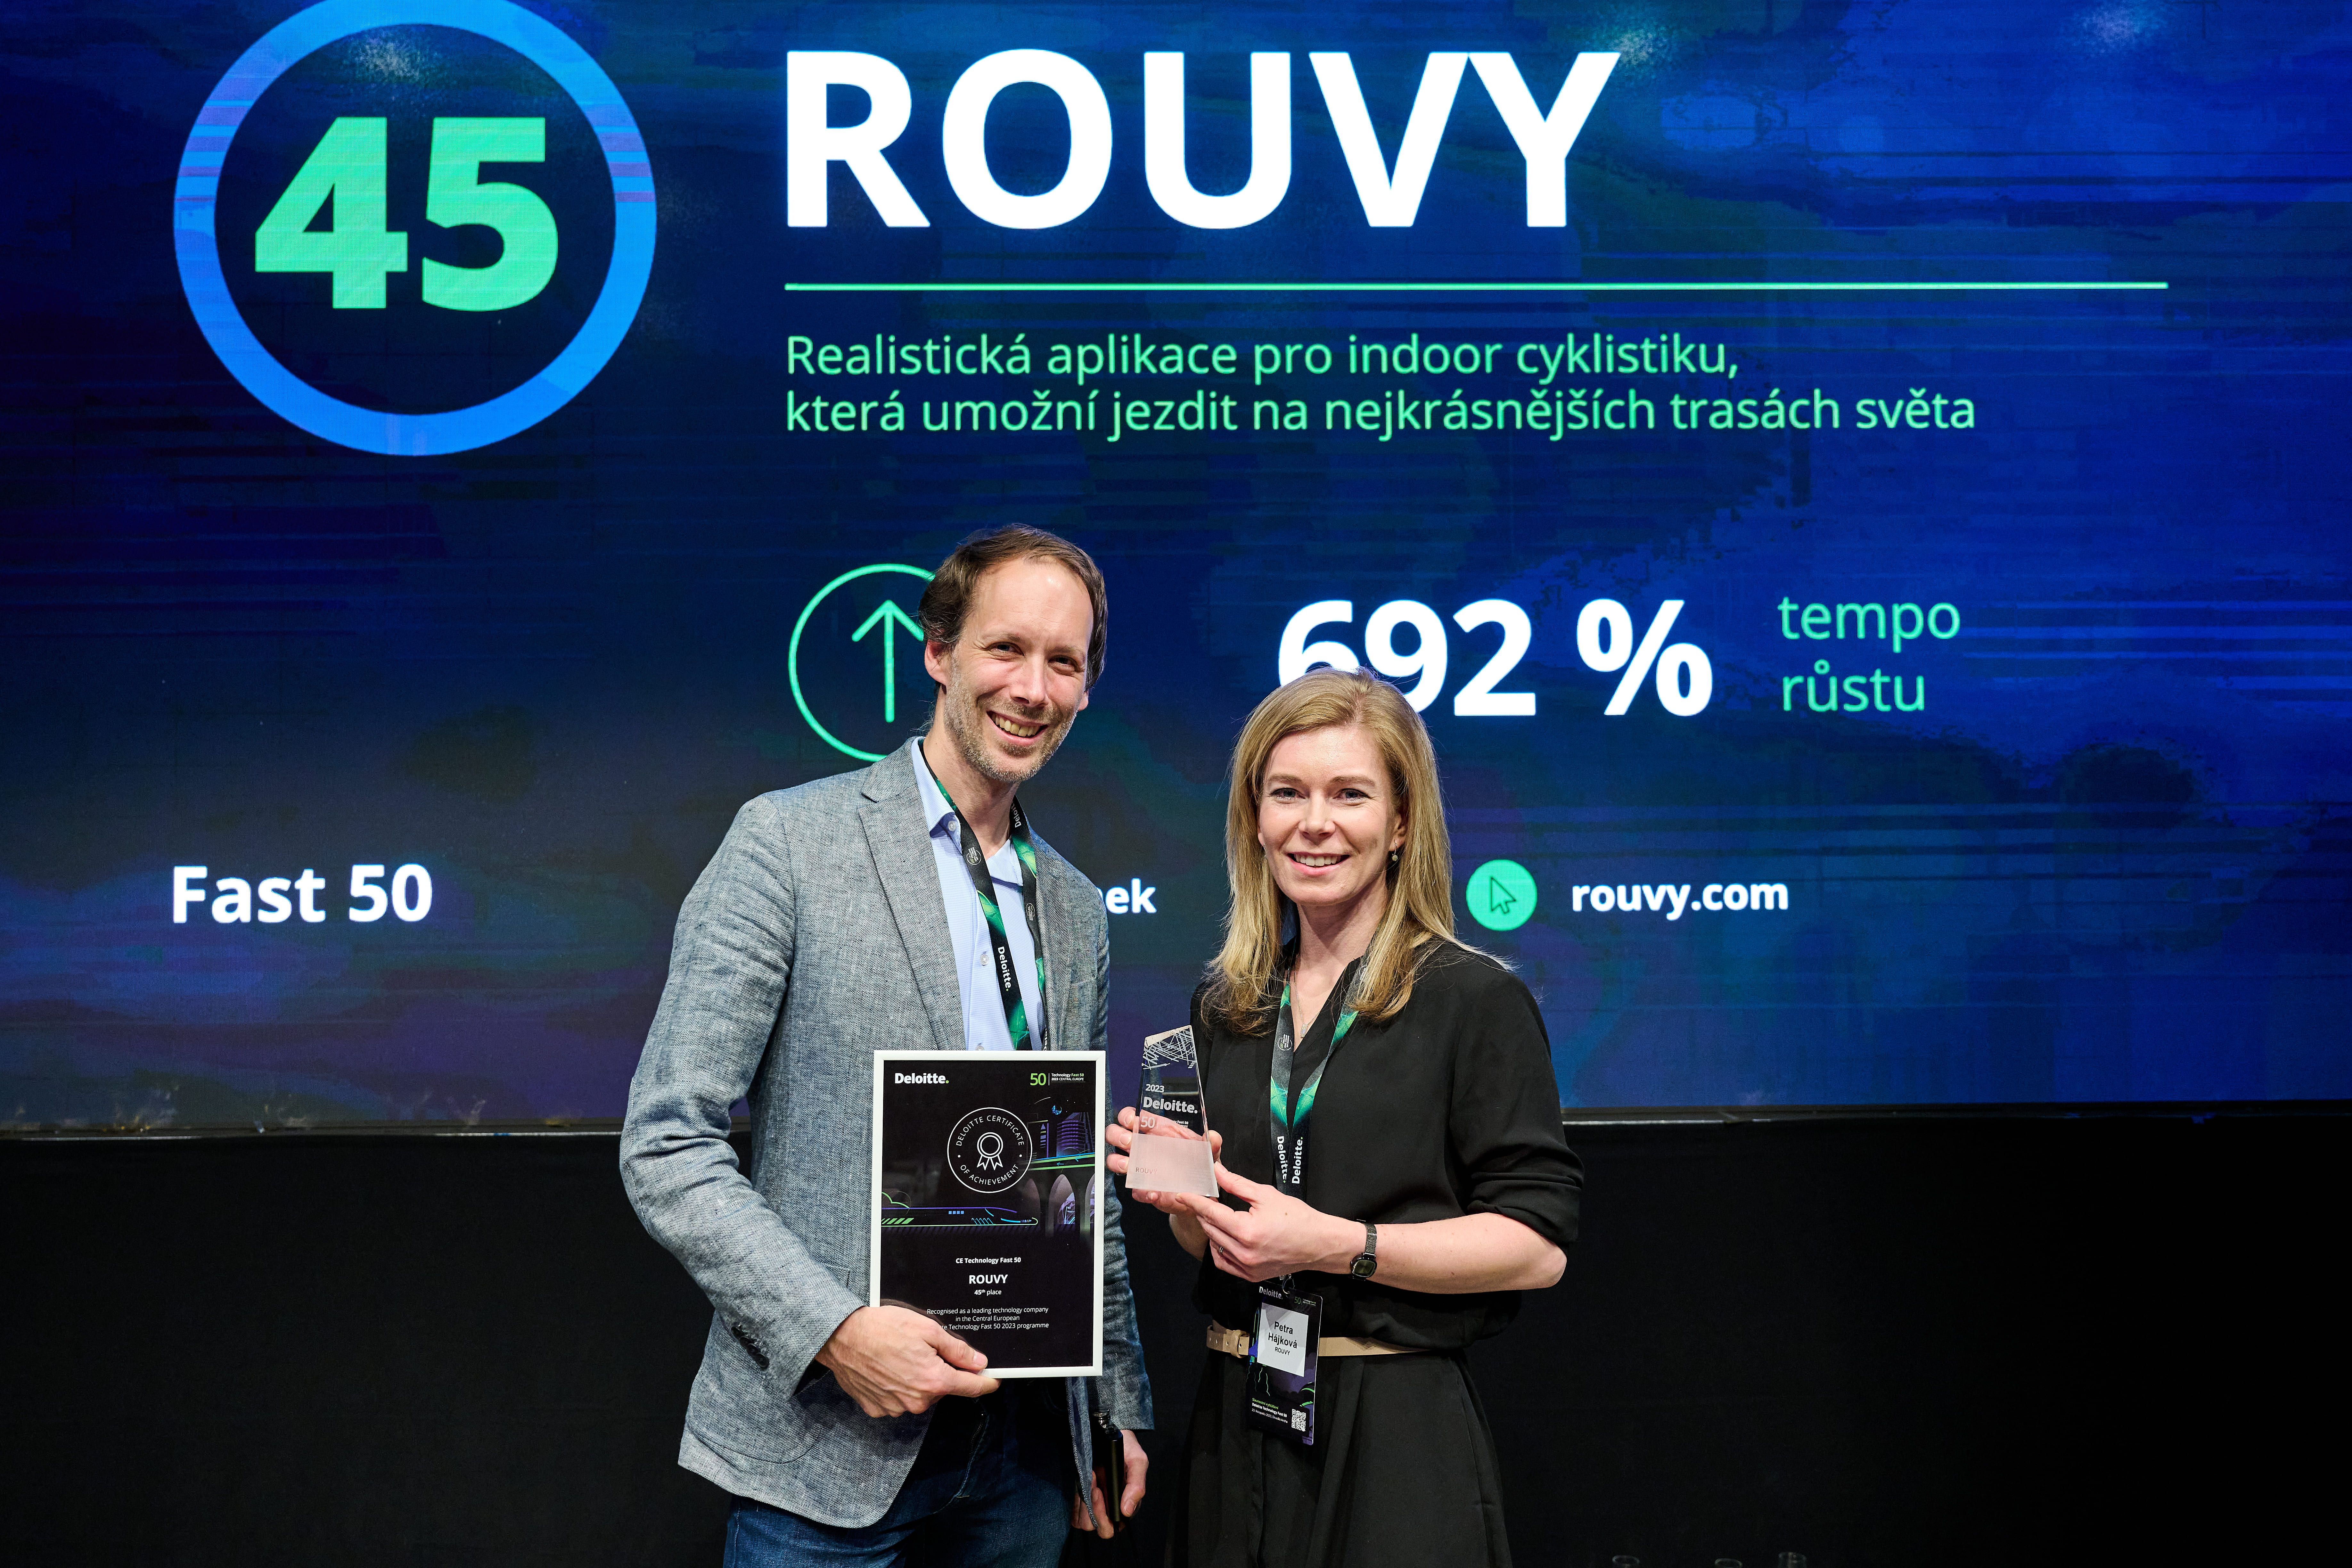 ROUVY placed among the fastest-growing technology companies in the Deloitte Technology Fast 50 Central Europe ranking